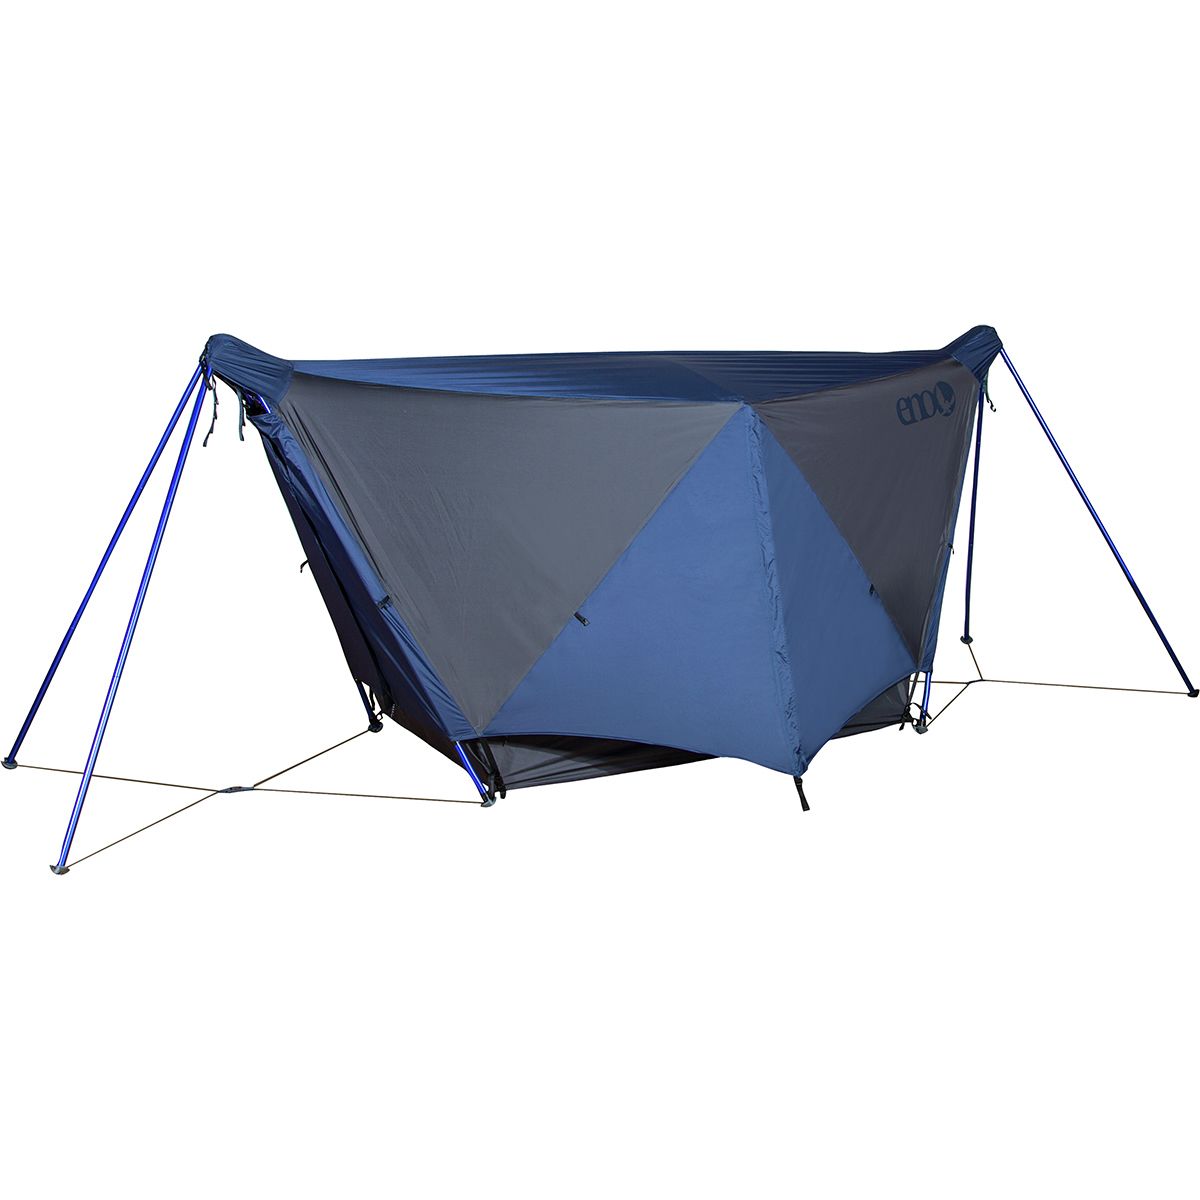 Eagles Nest Outfitters Nomad Shelter System - Hike & Camp